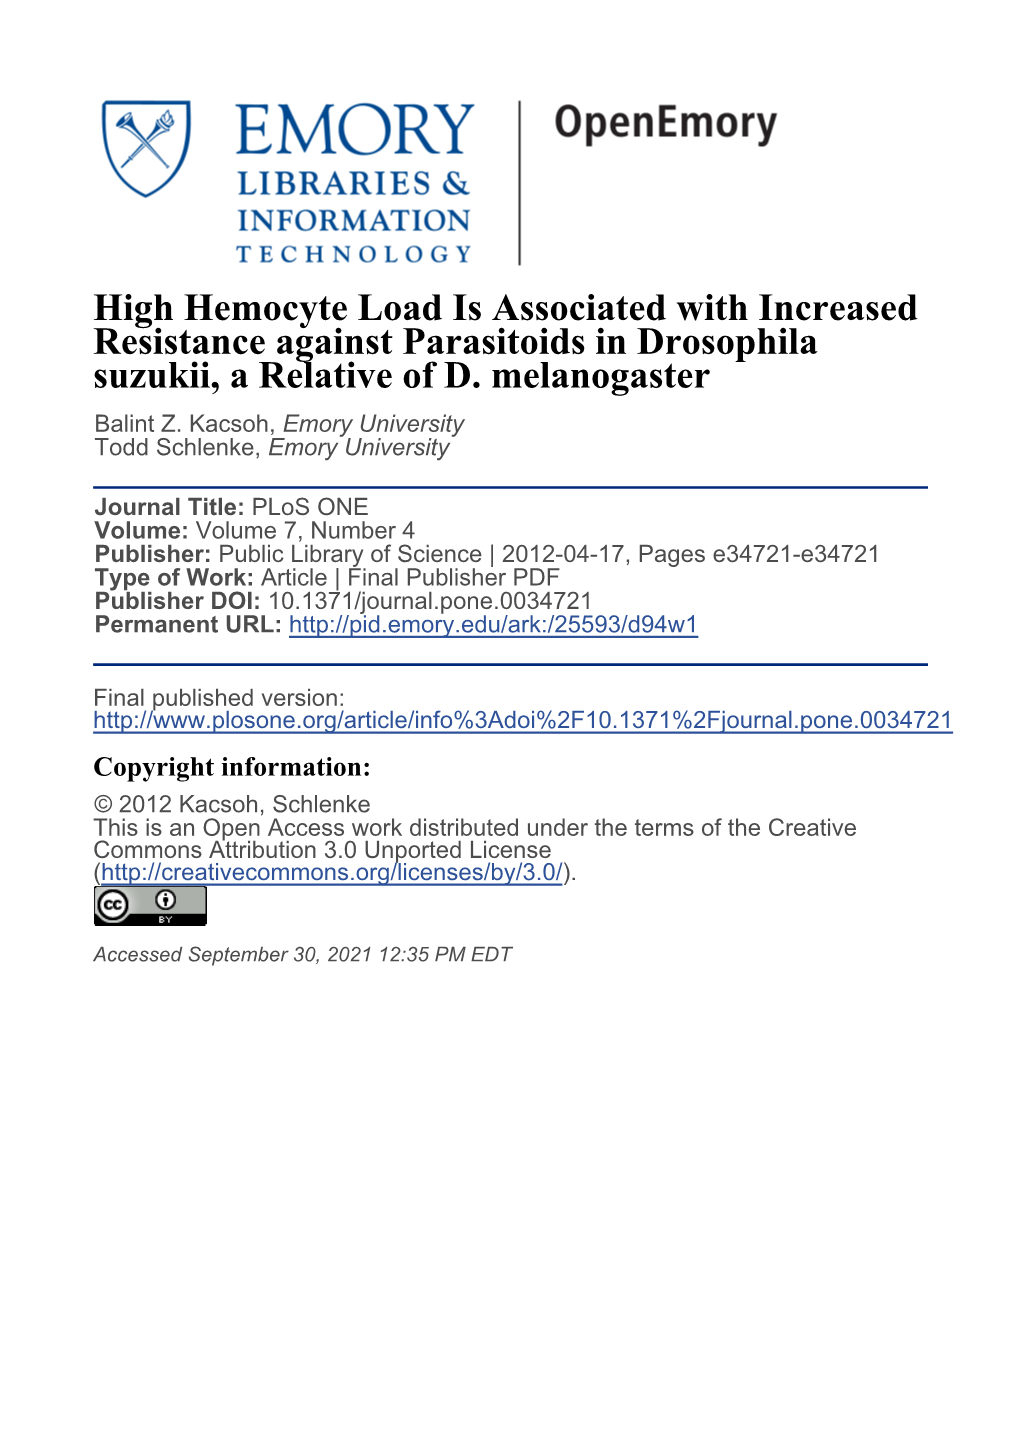 High Hemocyte Load Is Associated with Increased Resistance Against Parasitoids in Drosophila Suzukii, a Relative of D. Melanogaster Balint Z